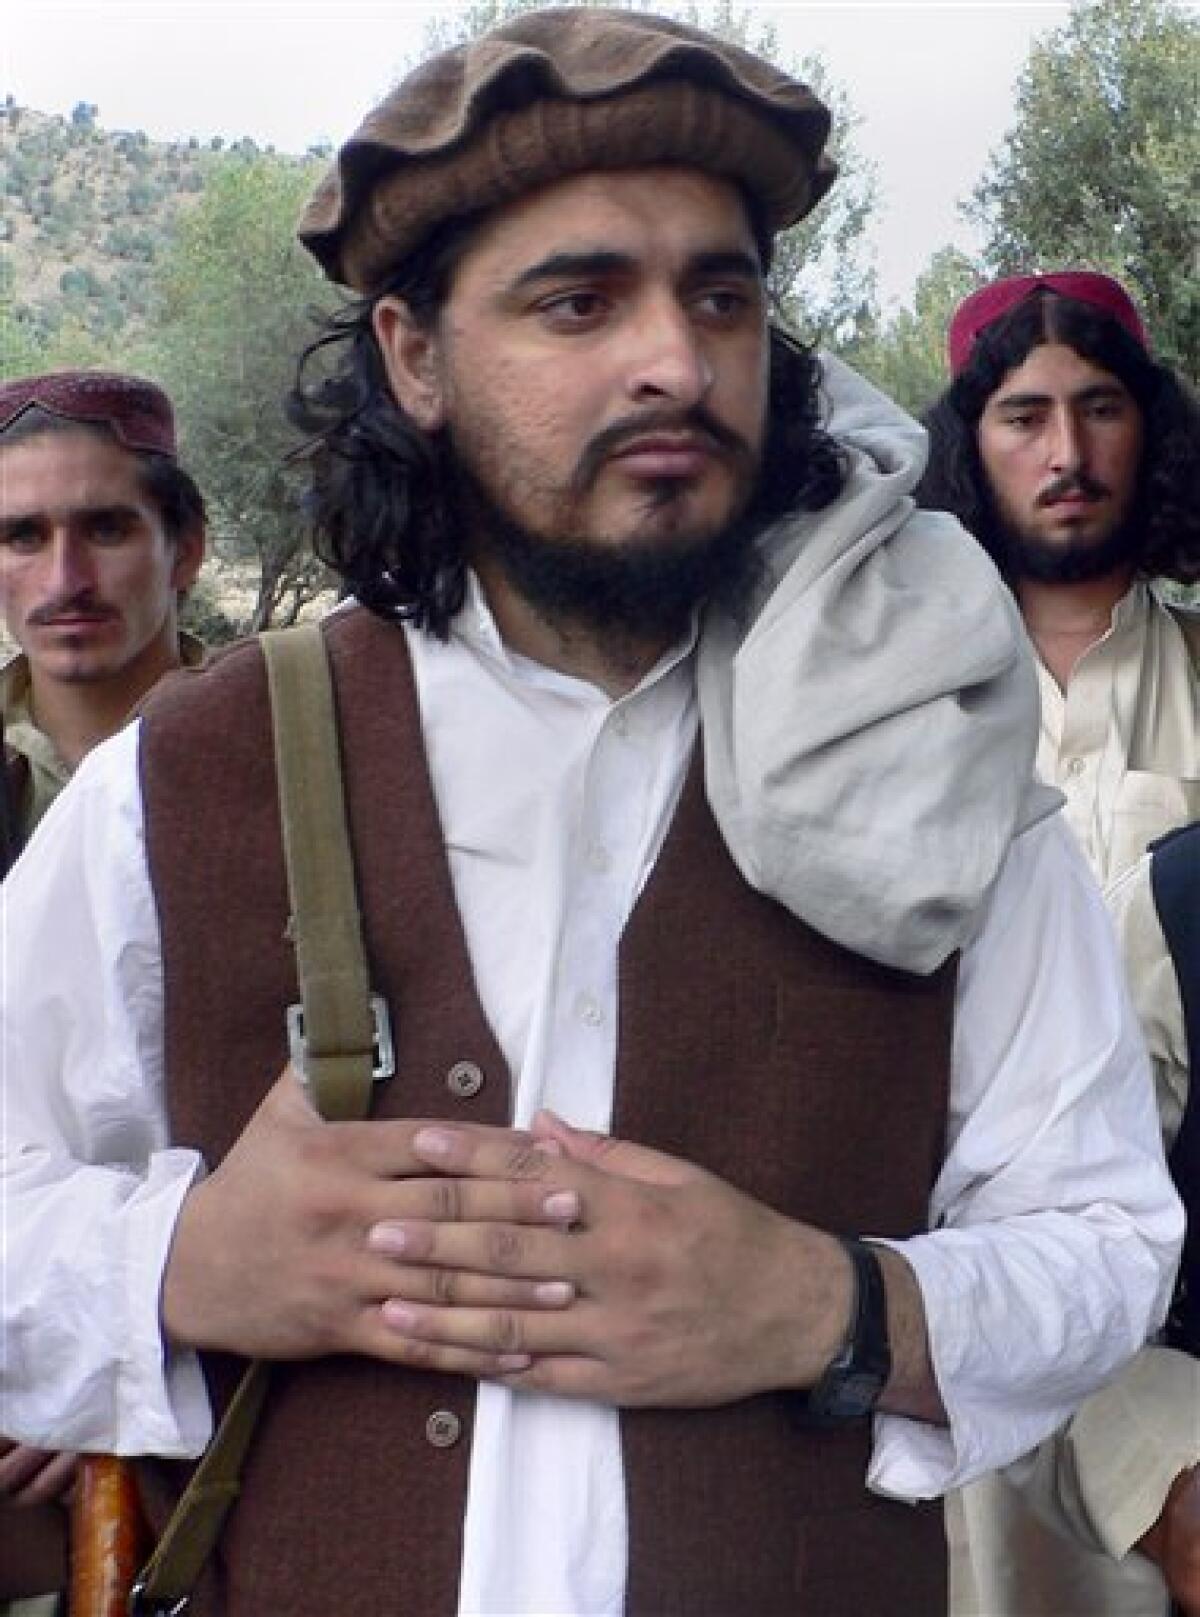 FILE - In this Oct. 4, 2009 file photo, Pakistani Taliban chief Hakimullah Mehsud arrives to meet with media in Sararogha of Pakistani tribal area of South Waziristan along the Afghanistan border. Mehsud is now believed to have survived a U.S. missile strike earlier this year, but has lost clout within the militant network, a senior intelligence officials said Thursday, April 29, 2010. (AP Photo/Ishtiaq Mehsud, File)